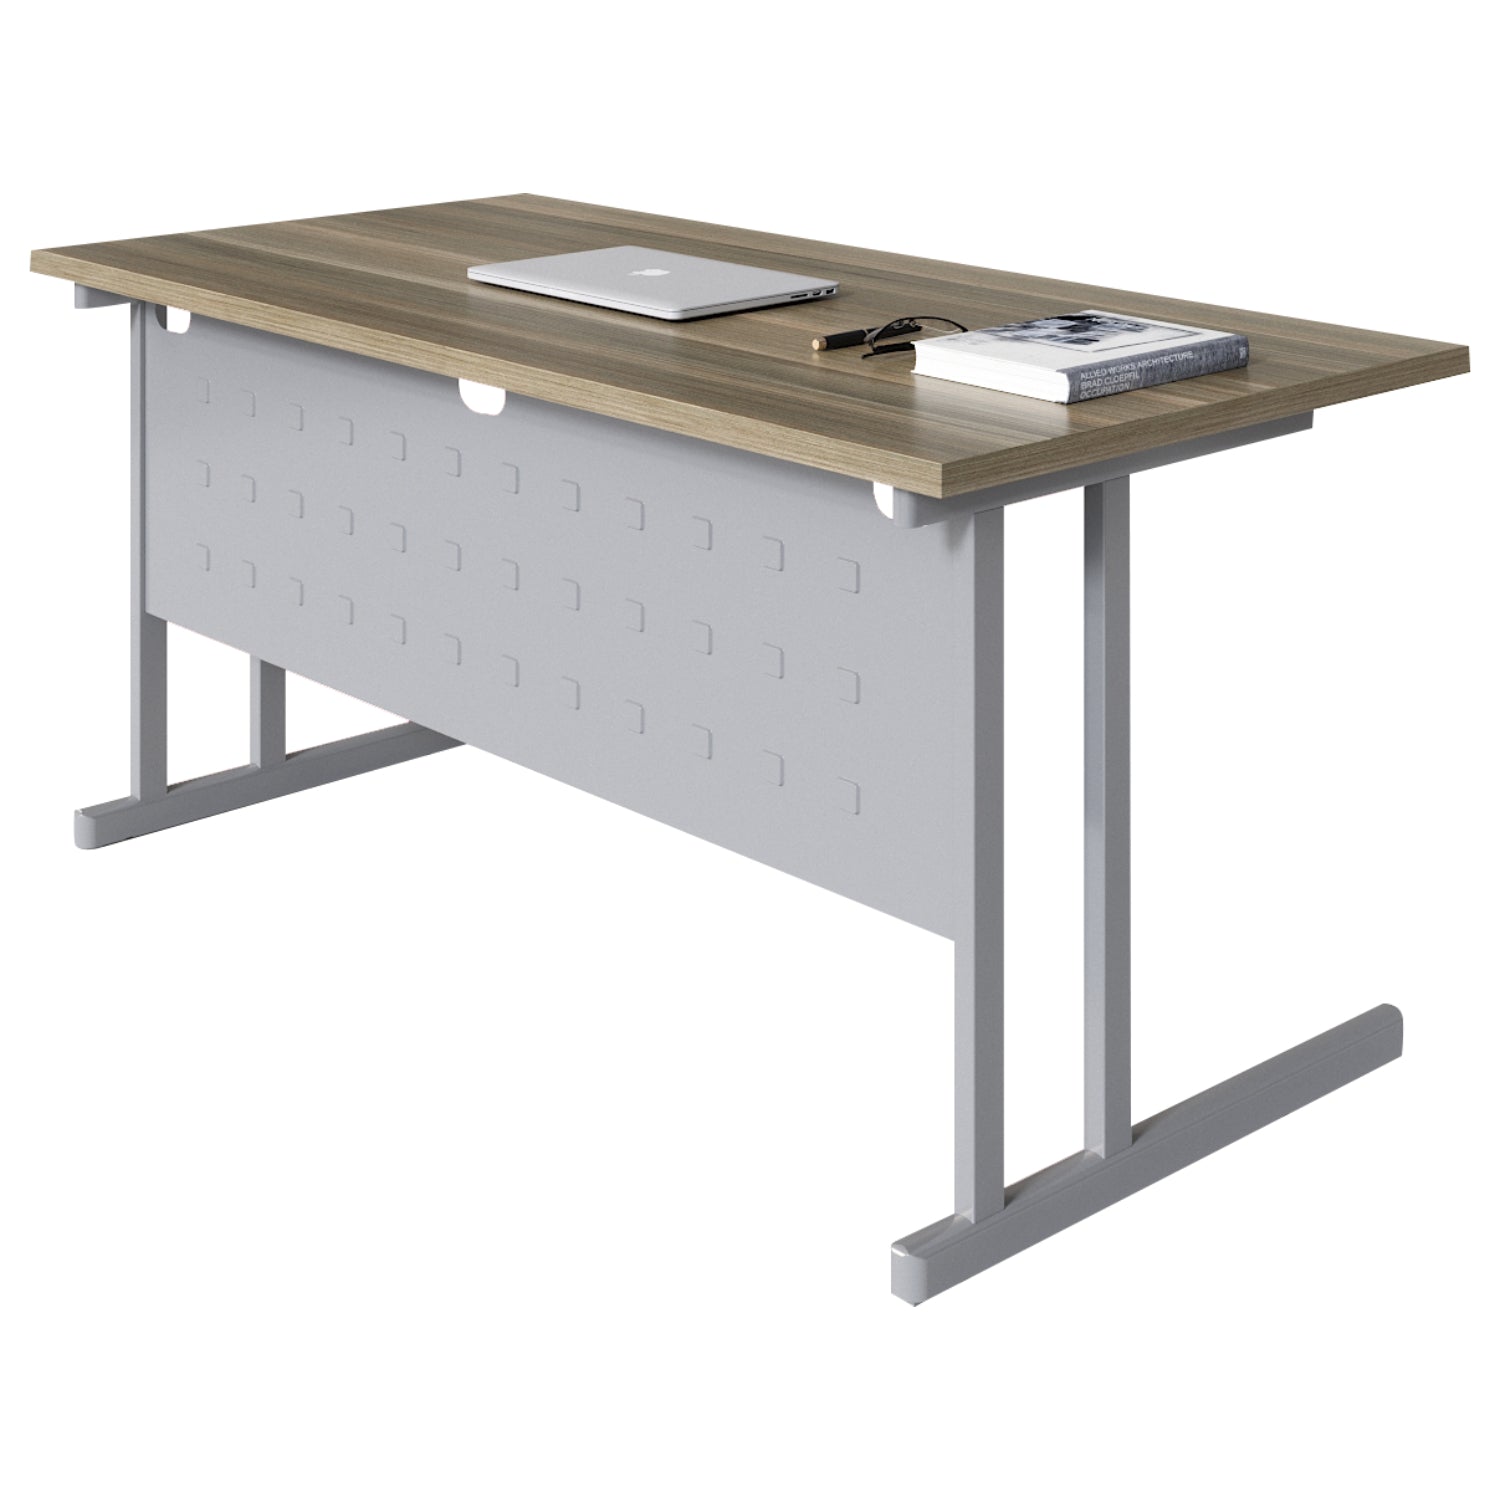 Delta Light Training Table with Modesty Panel